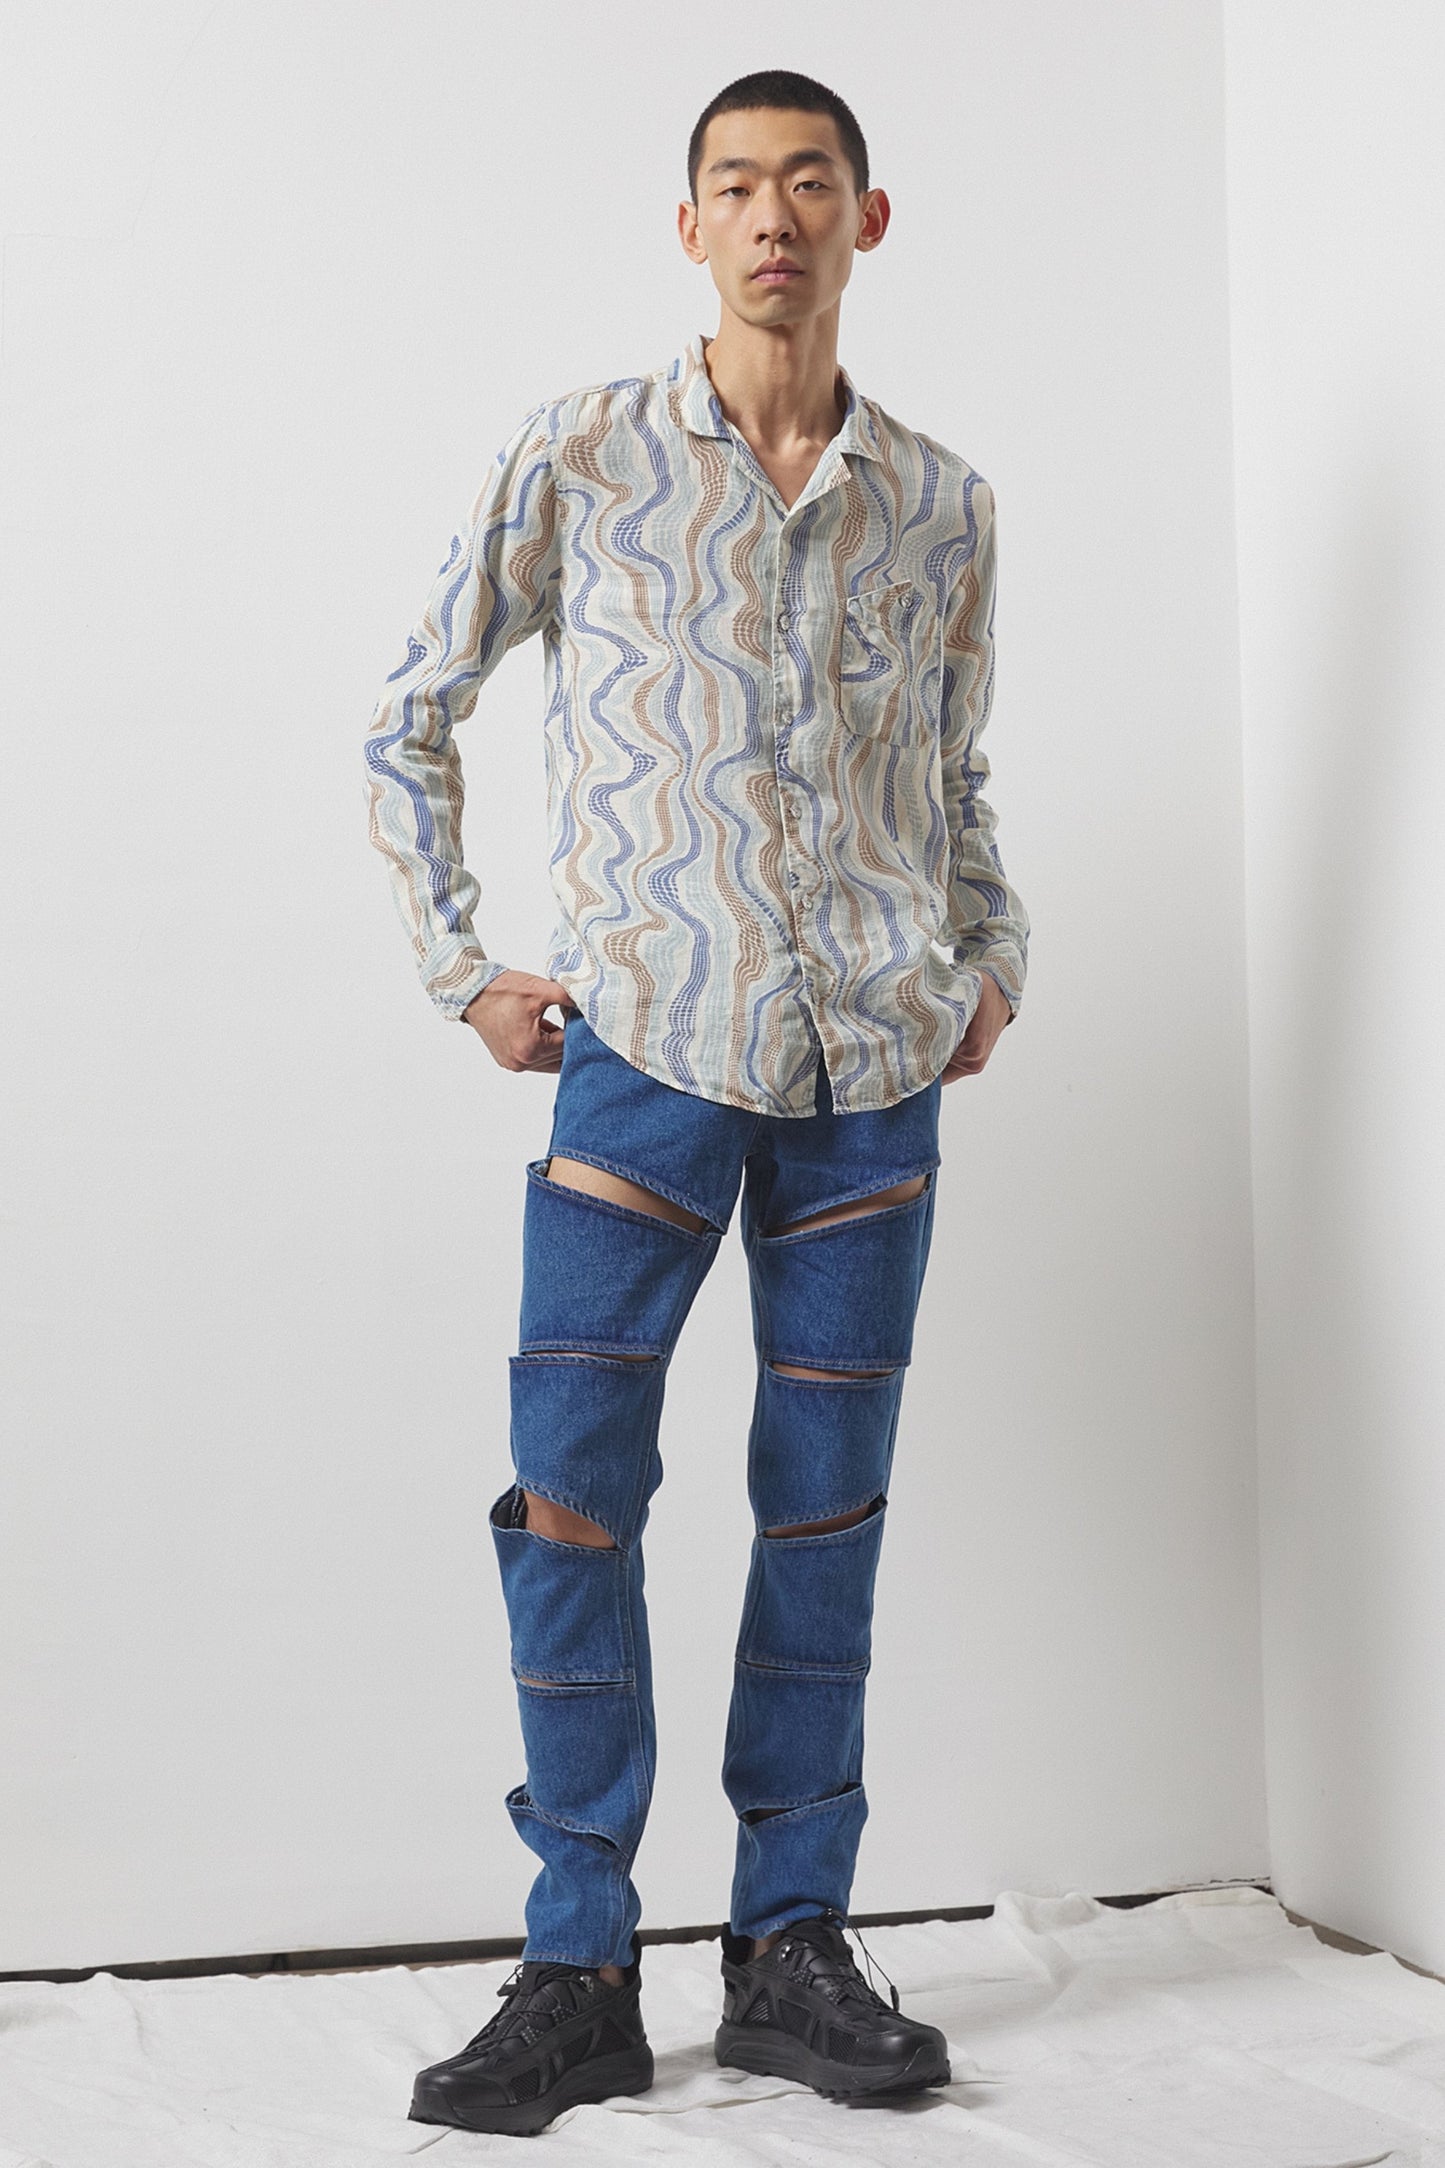 Barrie Cut-Out Jeans